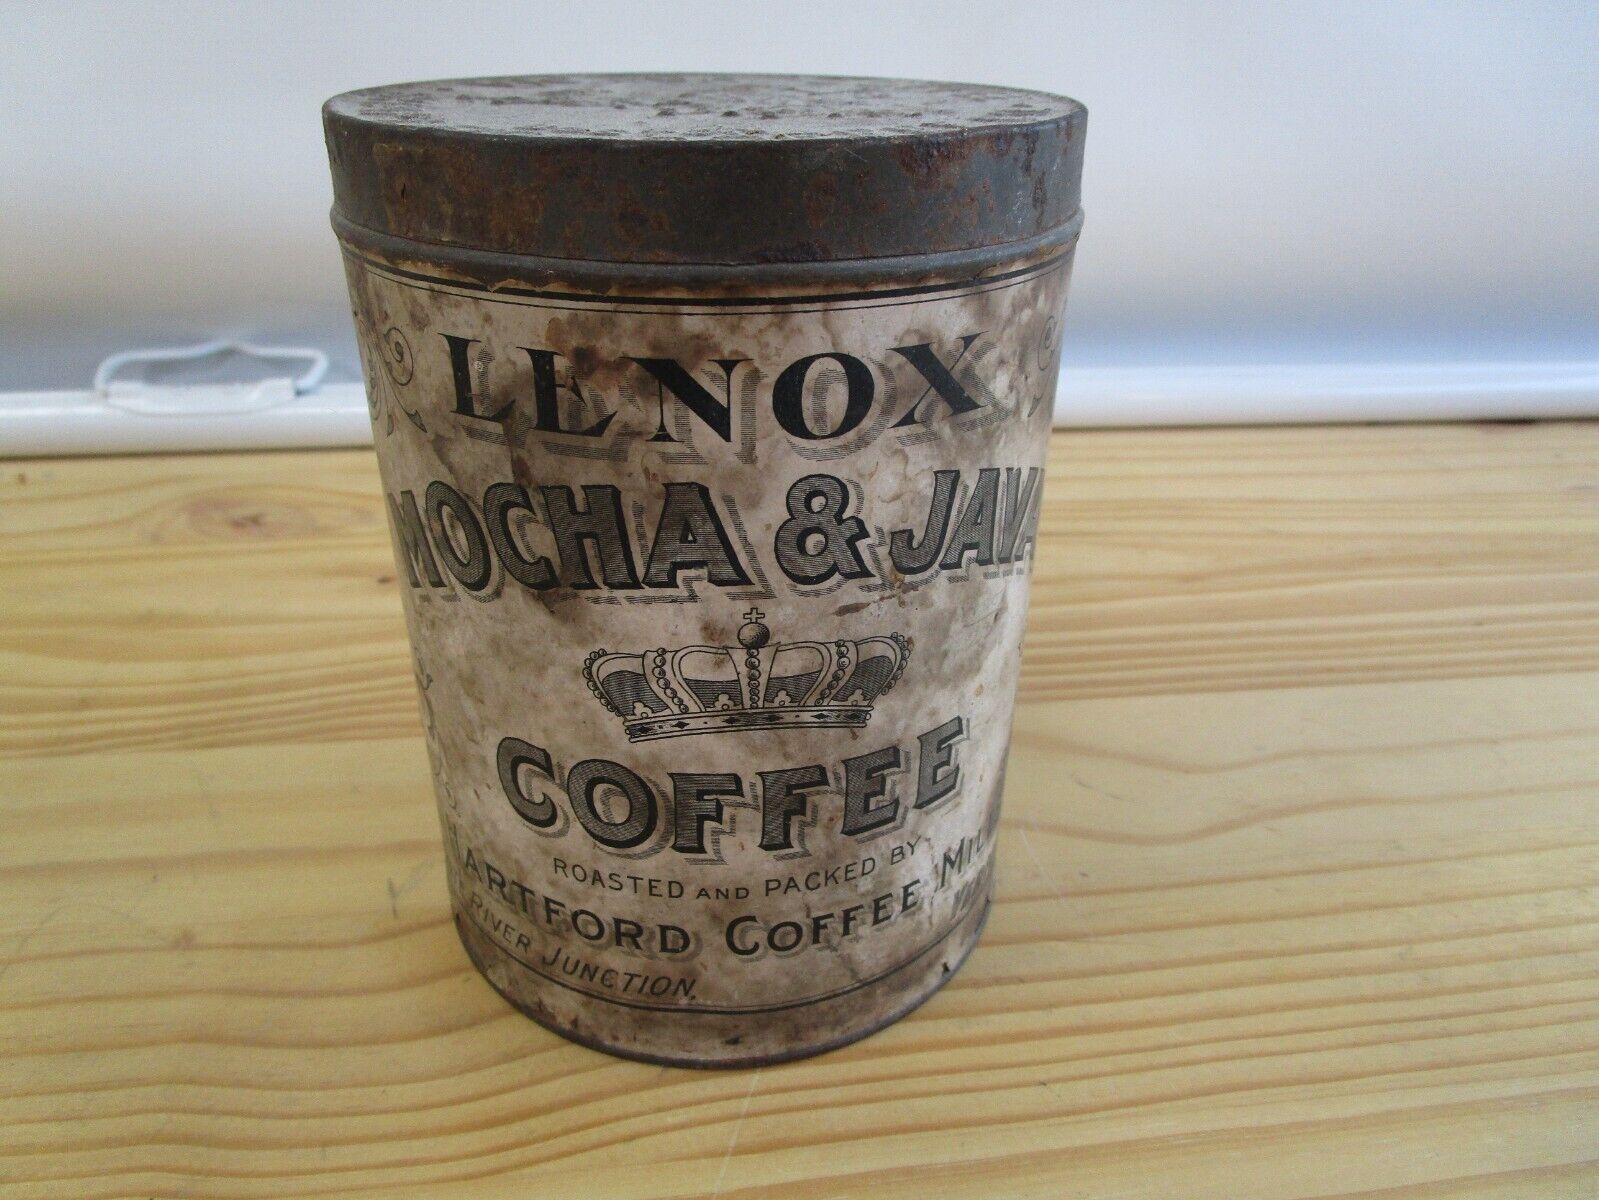 Antique Coffee Can Hartford VT Vermont White River Junction Lenox Victor Coffee